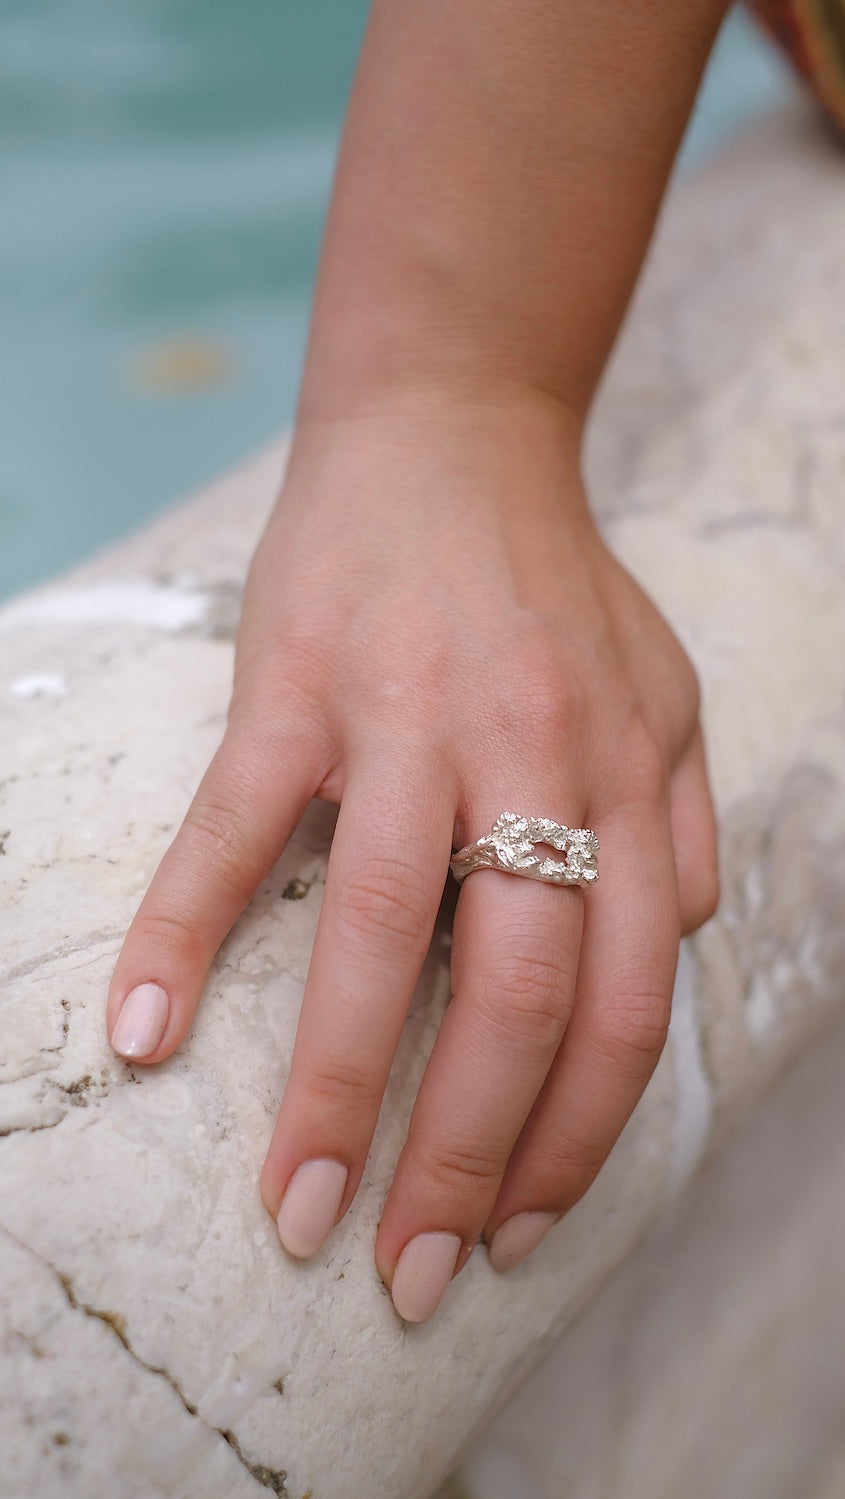 A woman's hand holding the Cremilde Bispo Jewellery Glade ring next to a pool surrounded by floral foliage.